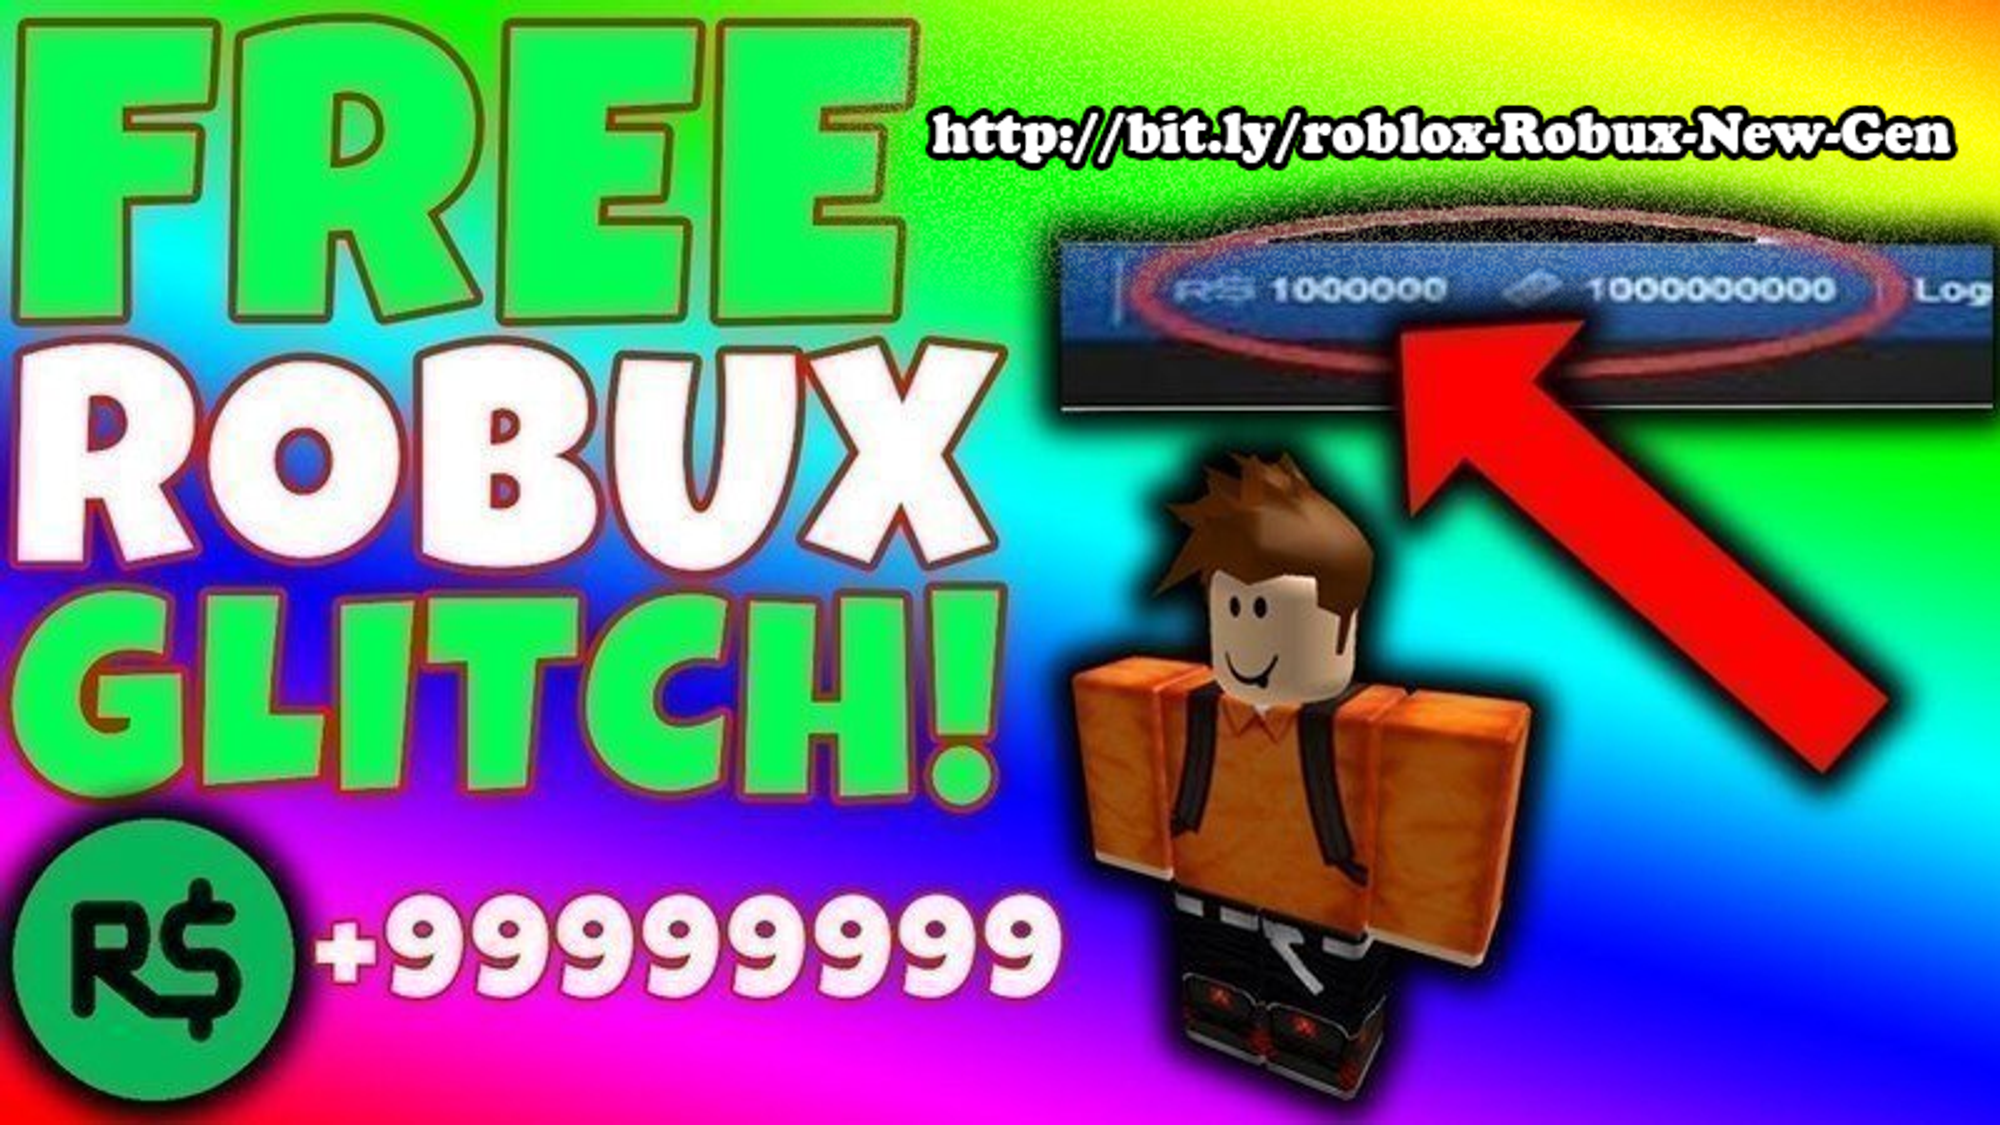 Free Robux Hack Generator 2019 V8 Pc Android Ios Xbox One - roblox hack cheats generator online 2019 1